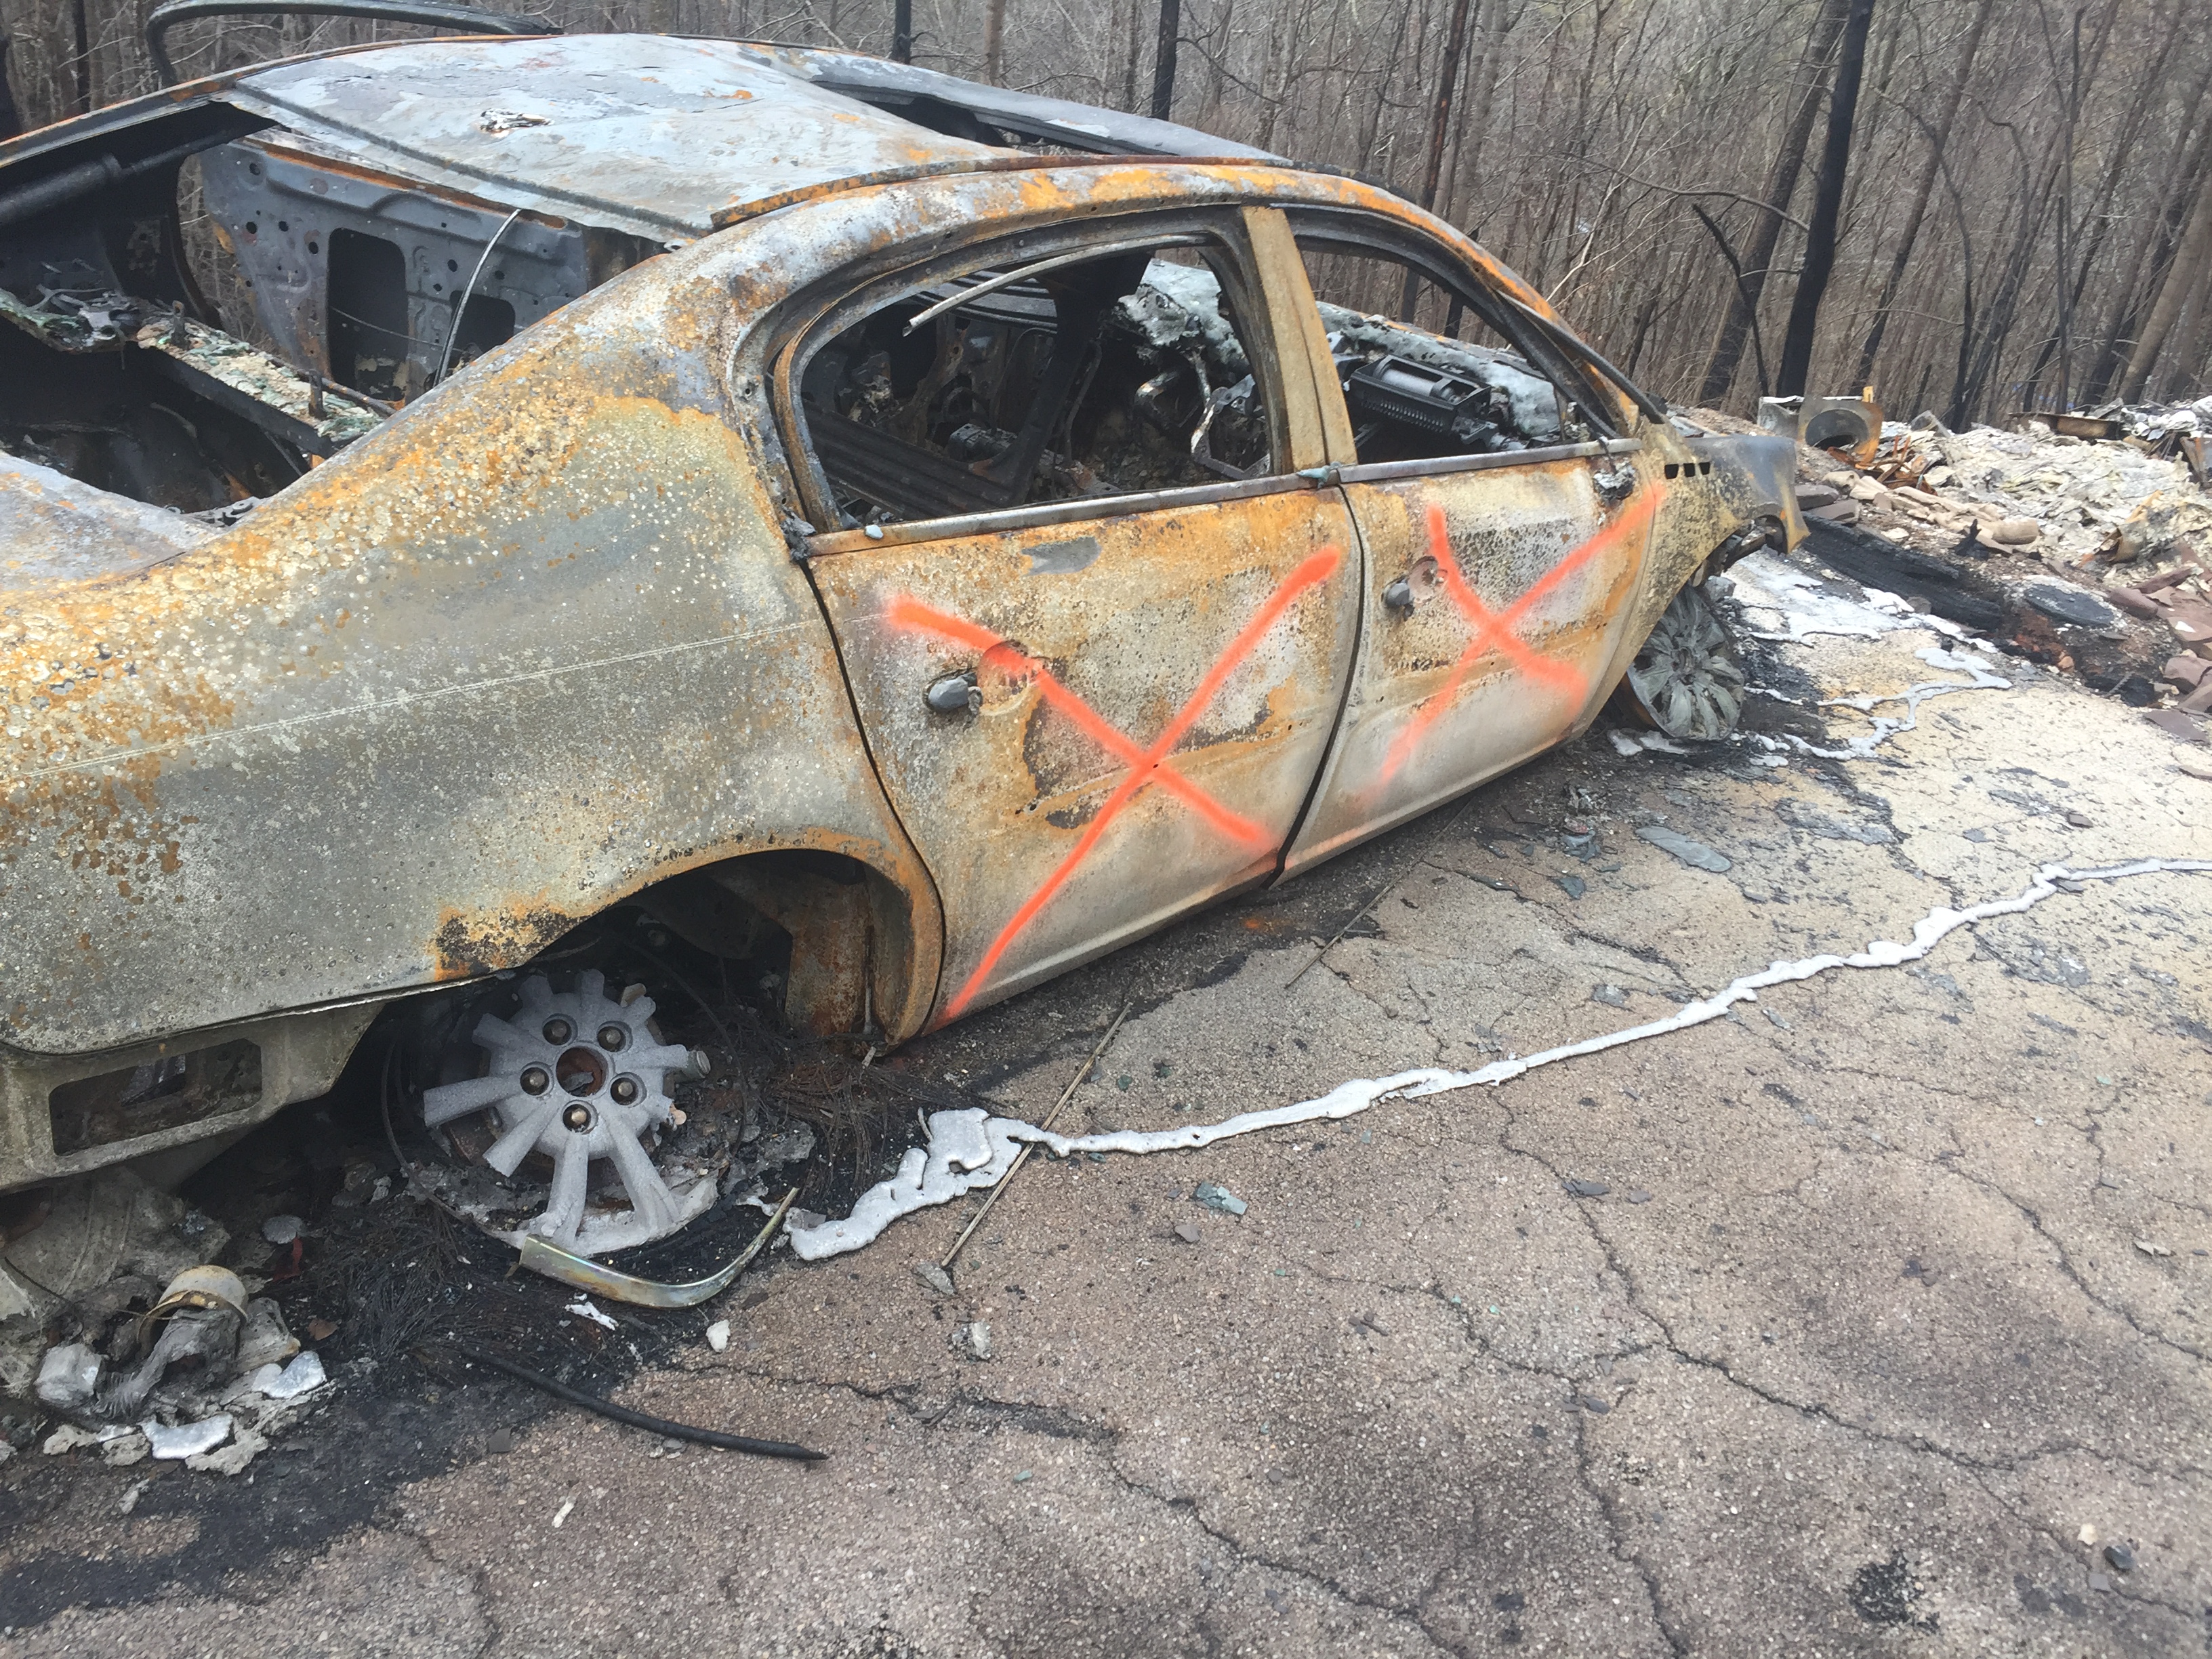 Burned out car from Gatlinburg wildfire